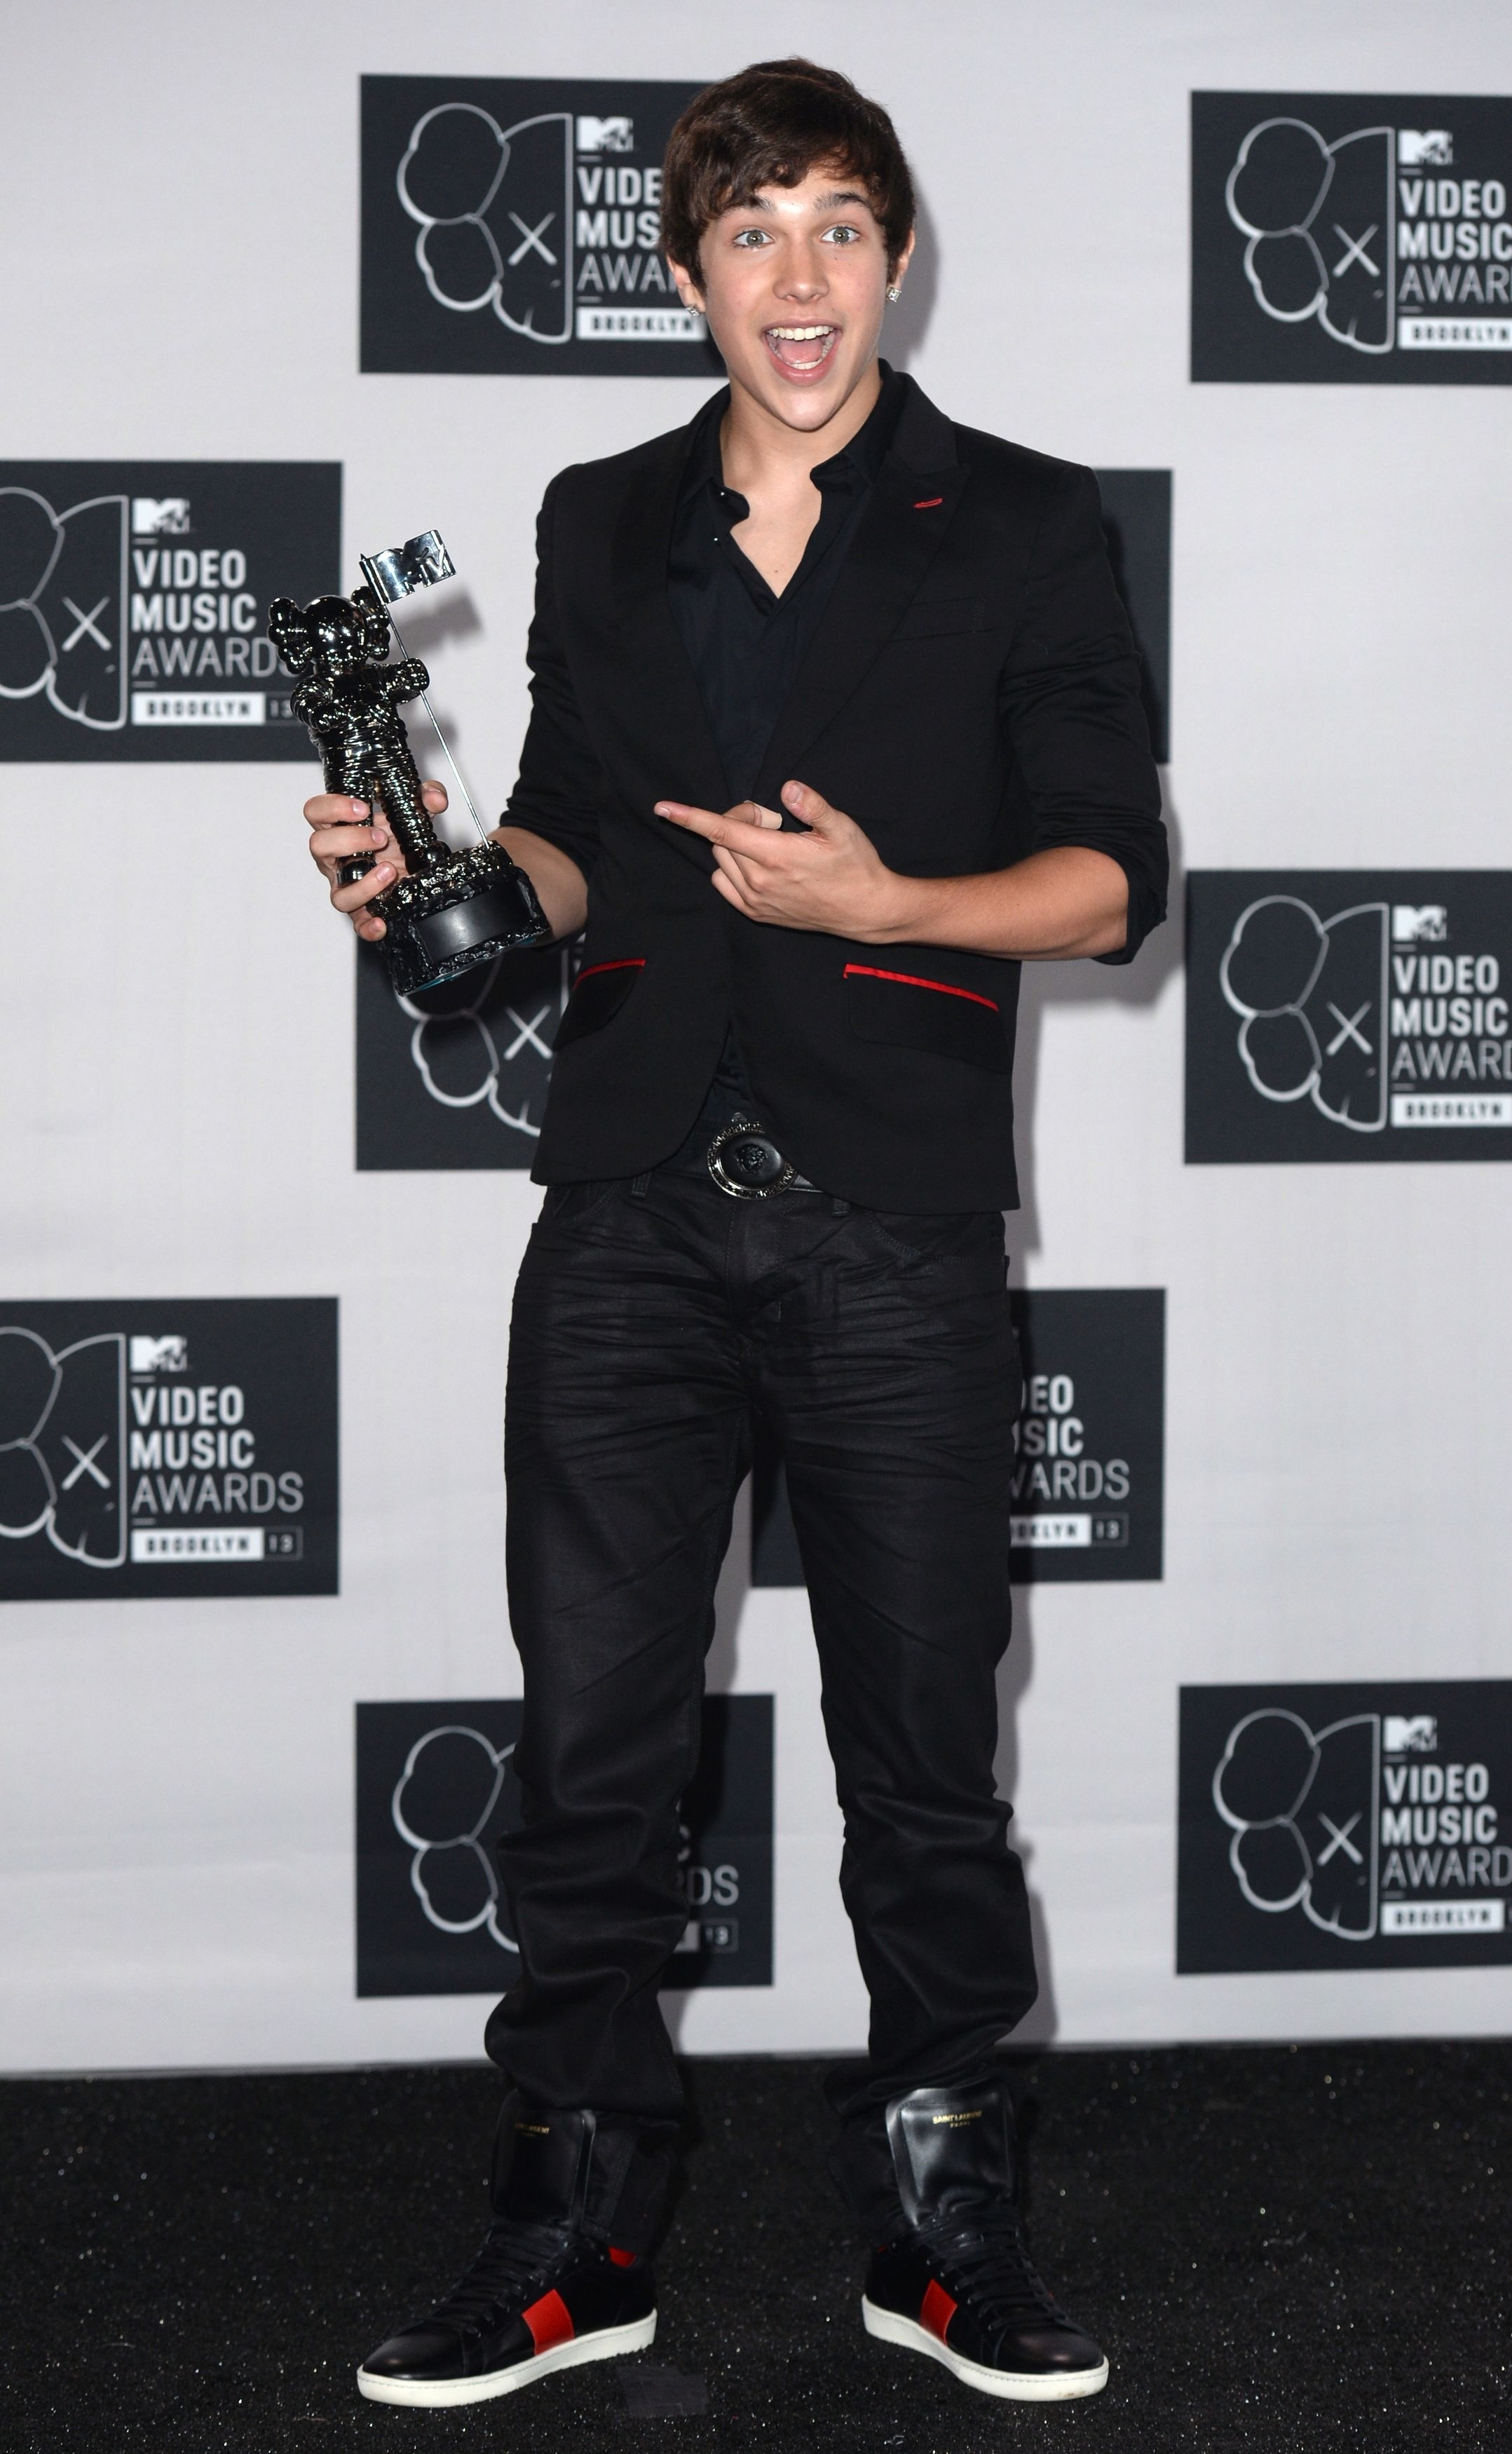 Austin Mahone poses for photos with his award